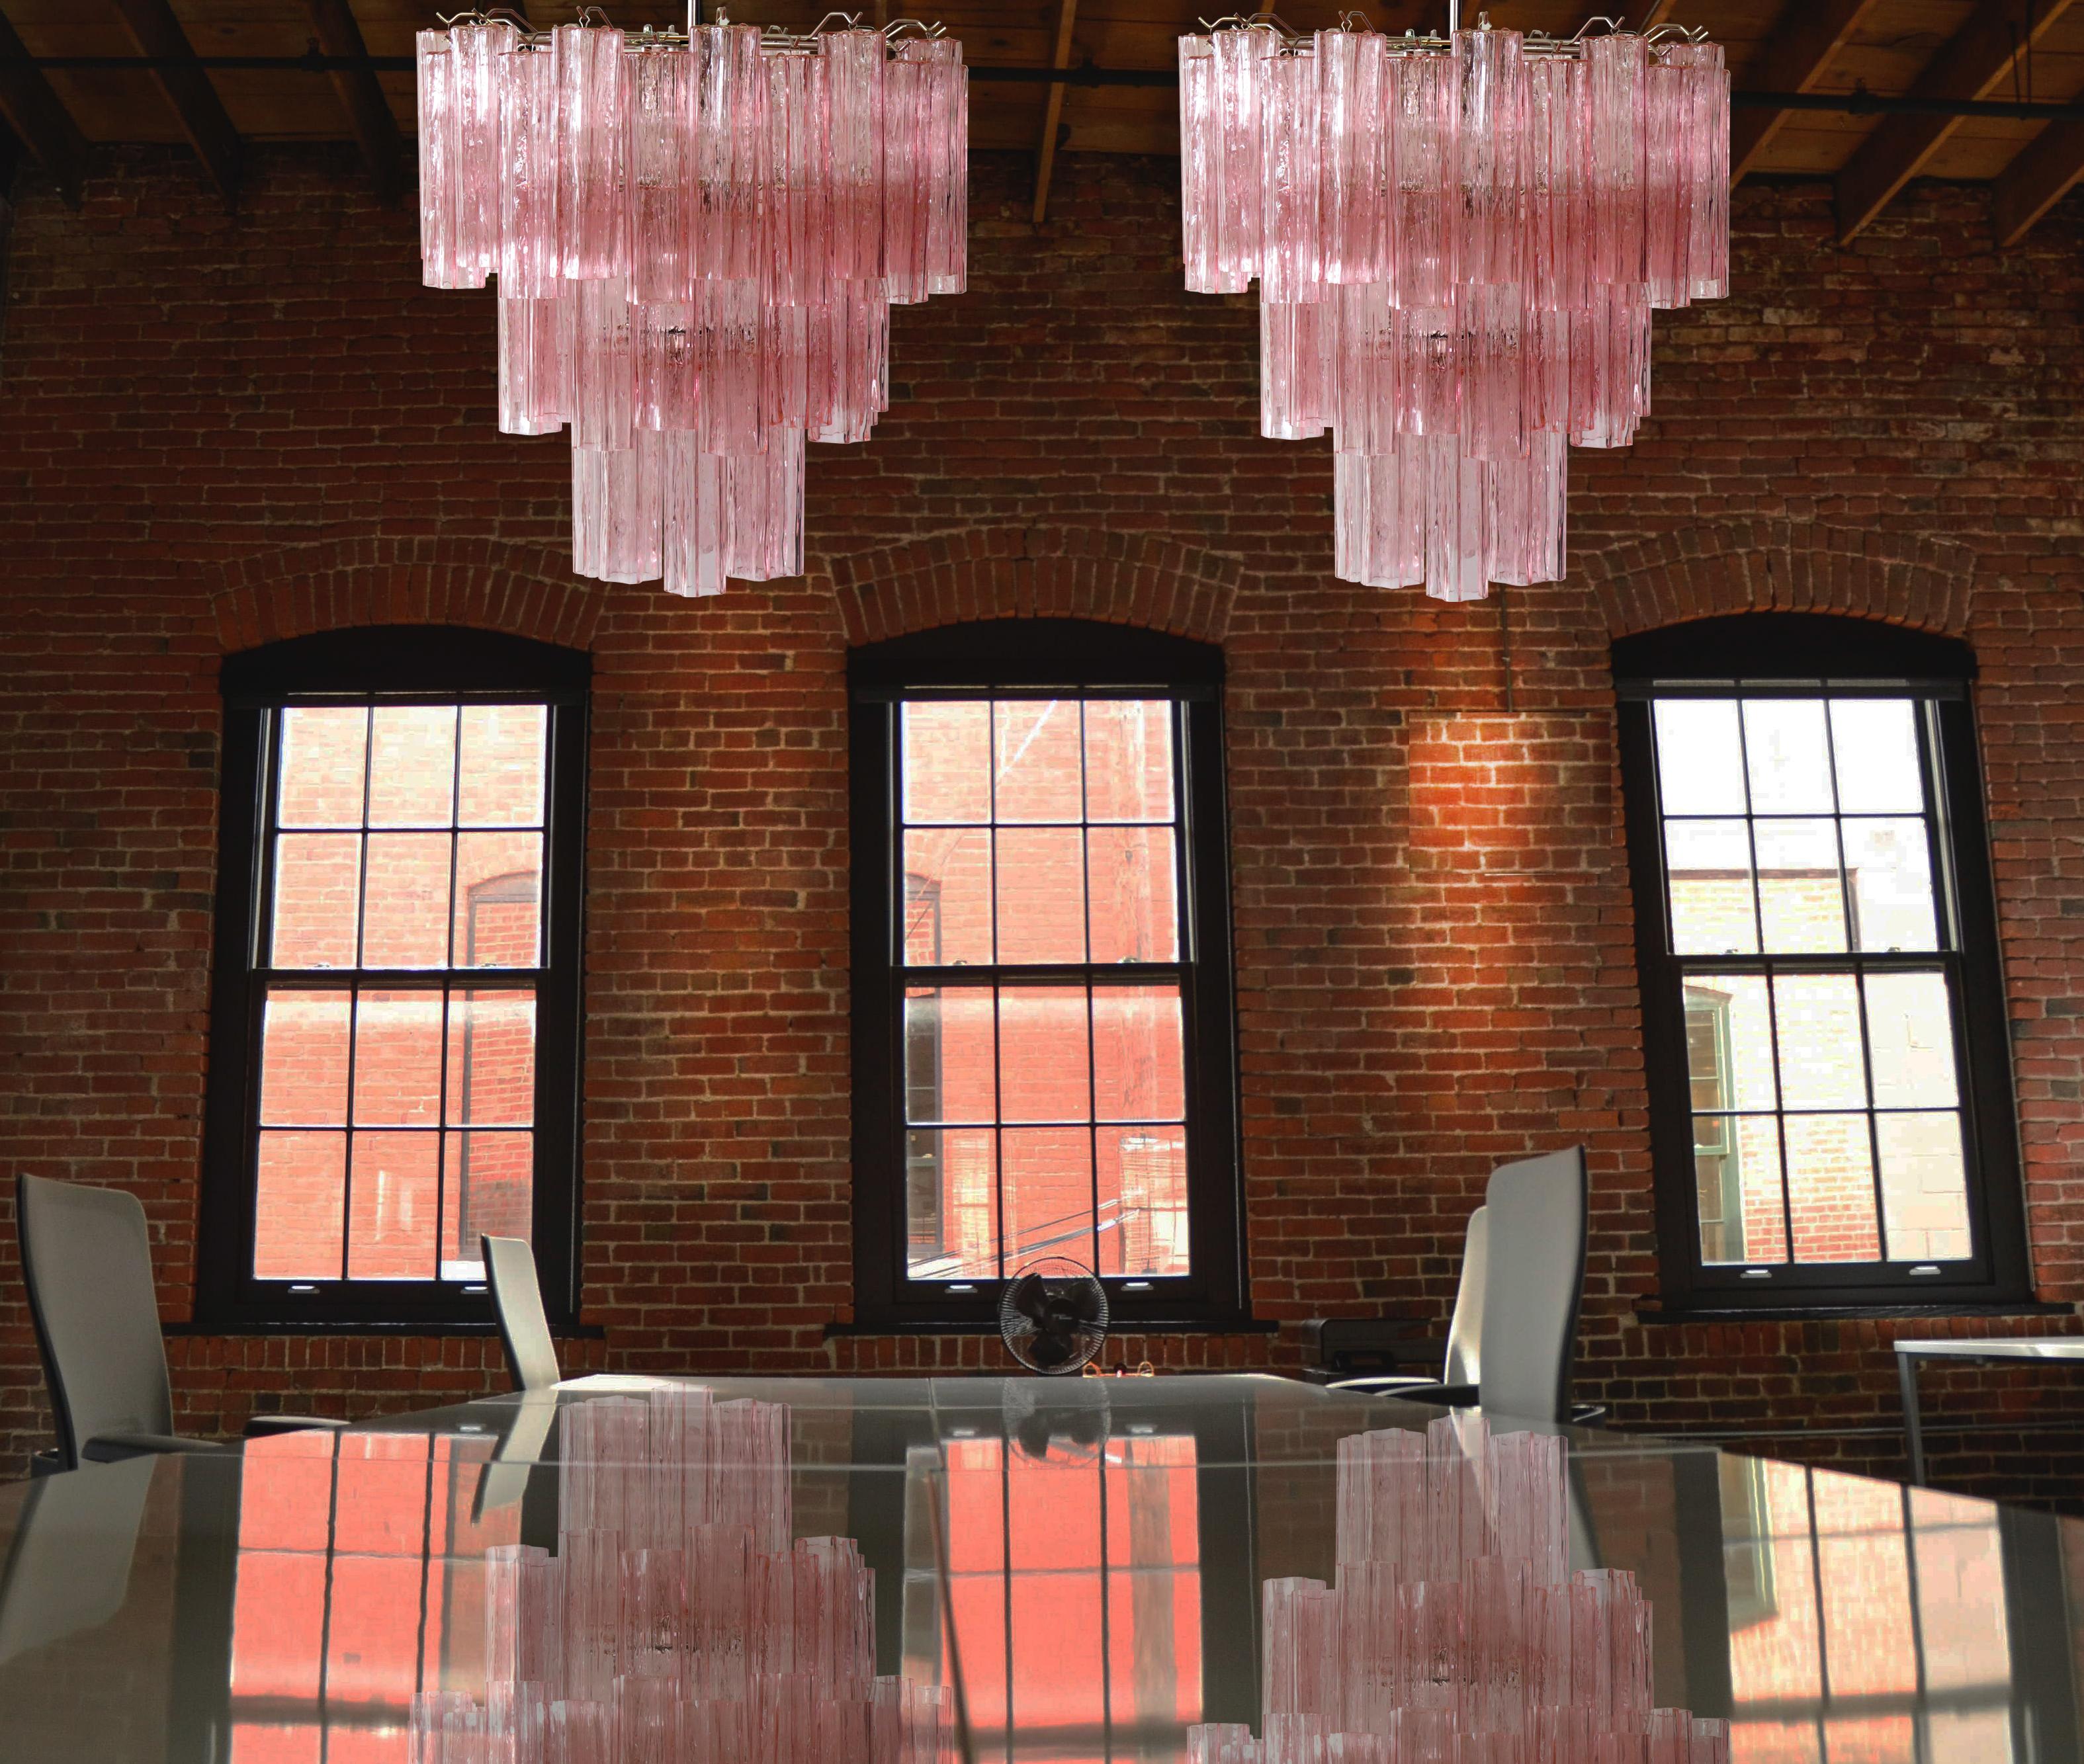 Pair three-tier Murano glass tube chandeliers, made each 48 pink glasses, Mid-Century Modern
Italian vintage chandelier in Murano glass and nickel-plated metal structure. The armour polished nickel supports 48 large pink glass tubes in a star